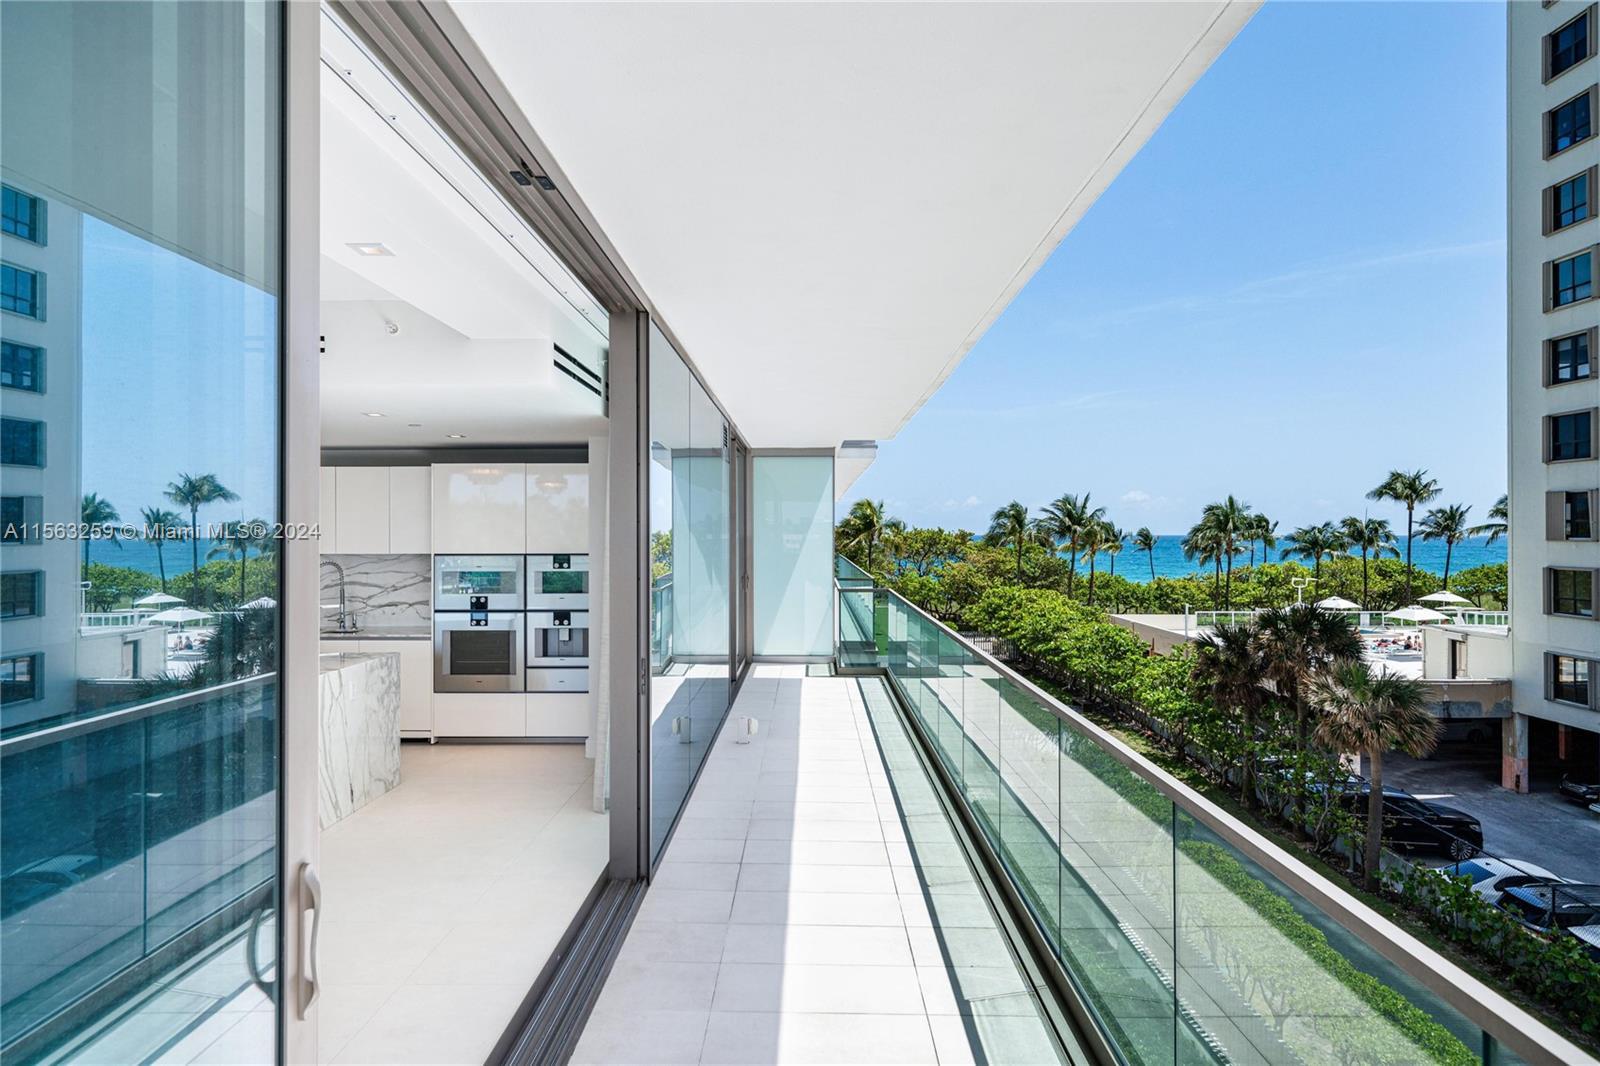 Photo of 10201 Collins Ave #311 in Bal Harbour, FL